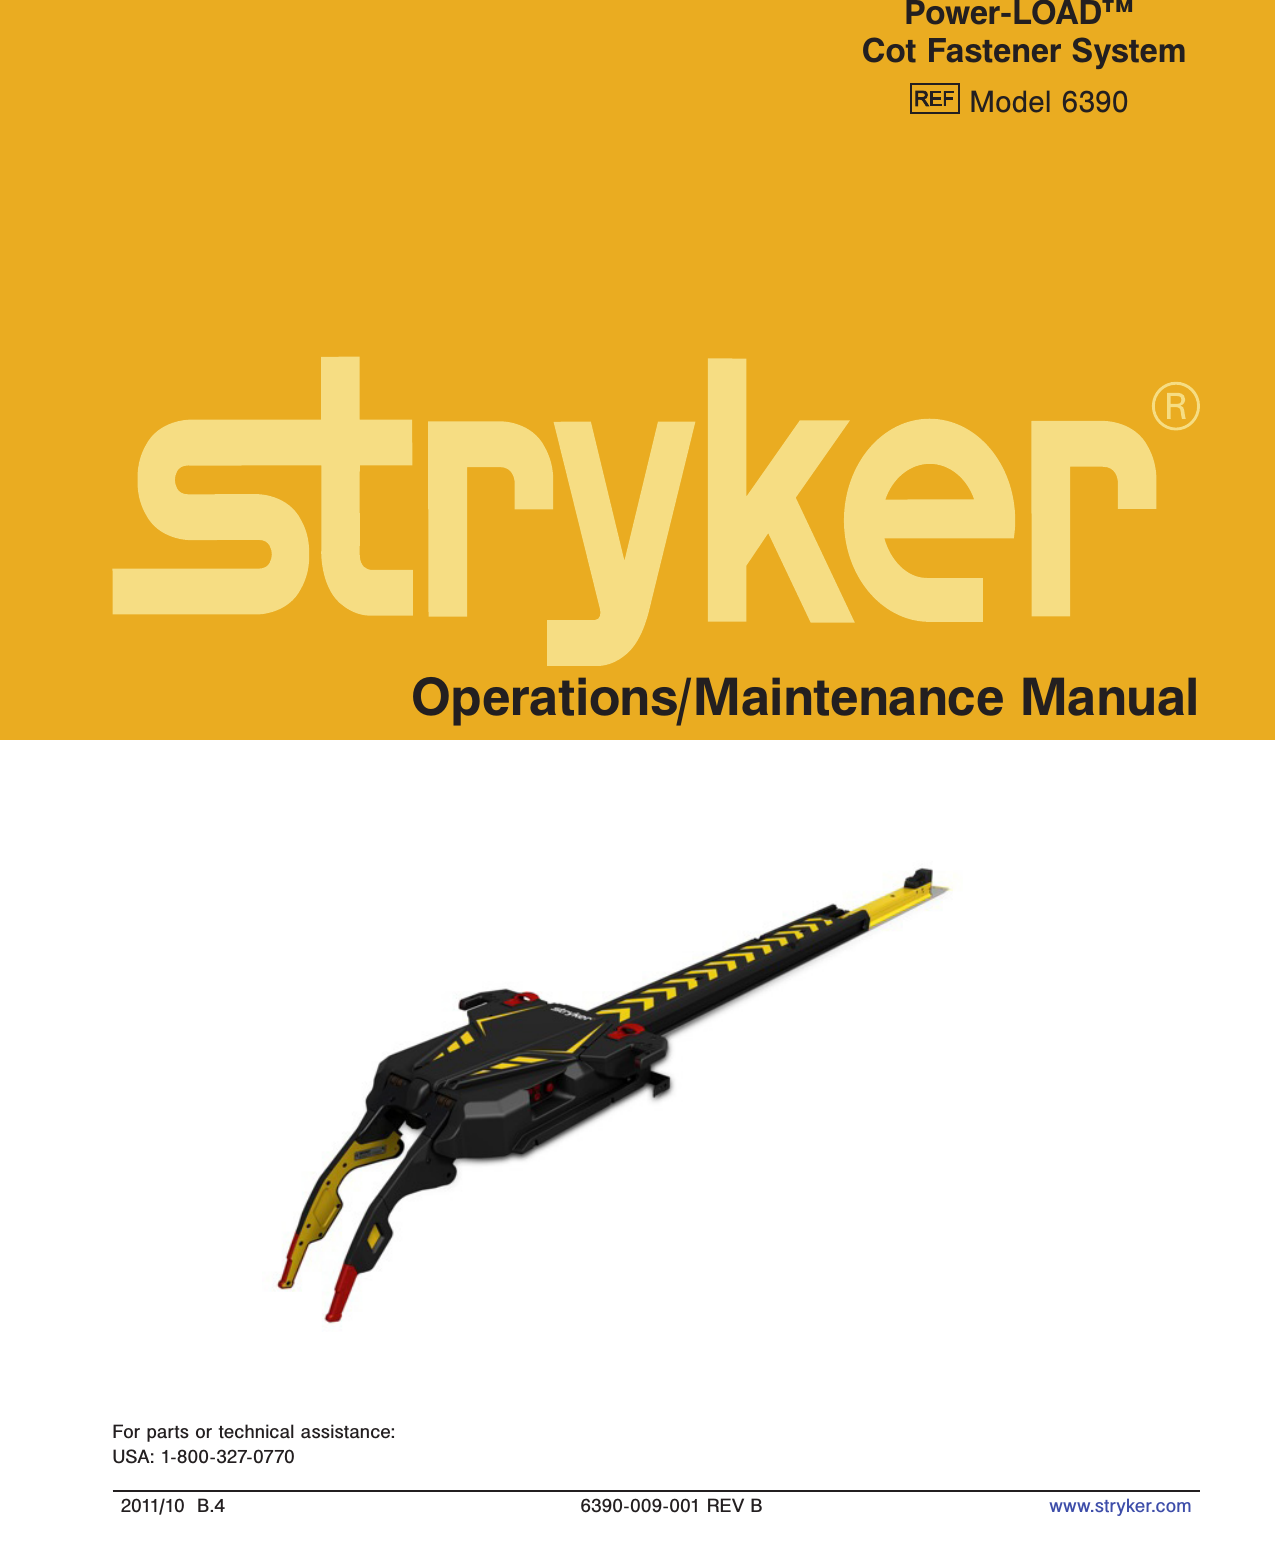 2011/10  B.4 6390-009-001 REV B www.stryker.comPower-LOAD™ Cot Fastener System Model 6390Operations/Maintenance ManualFor parts or technical assistance:USA: 1-800-327-0770